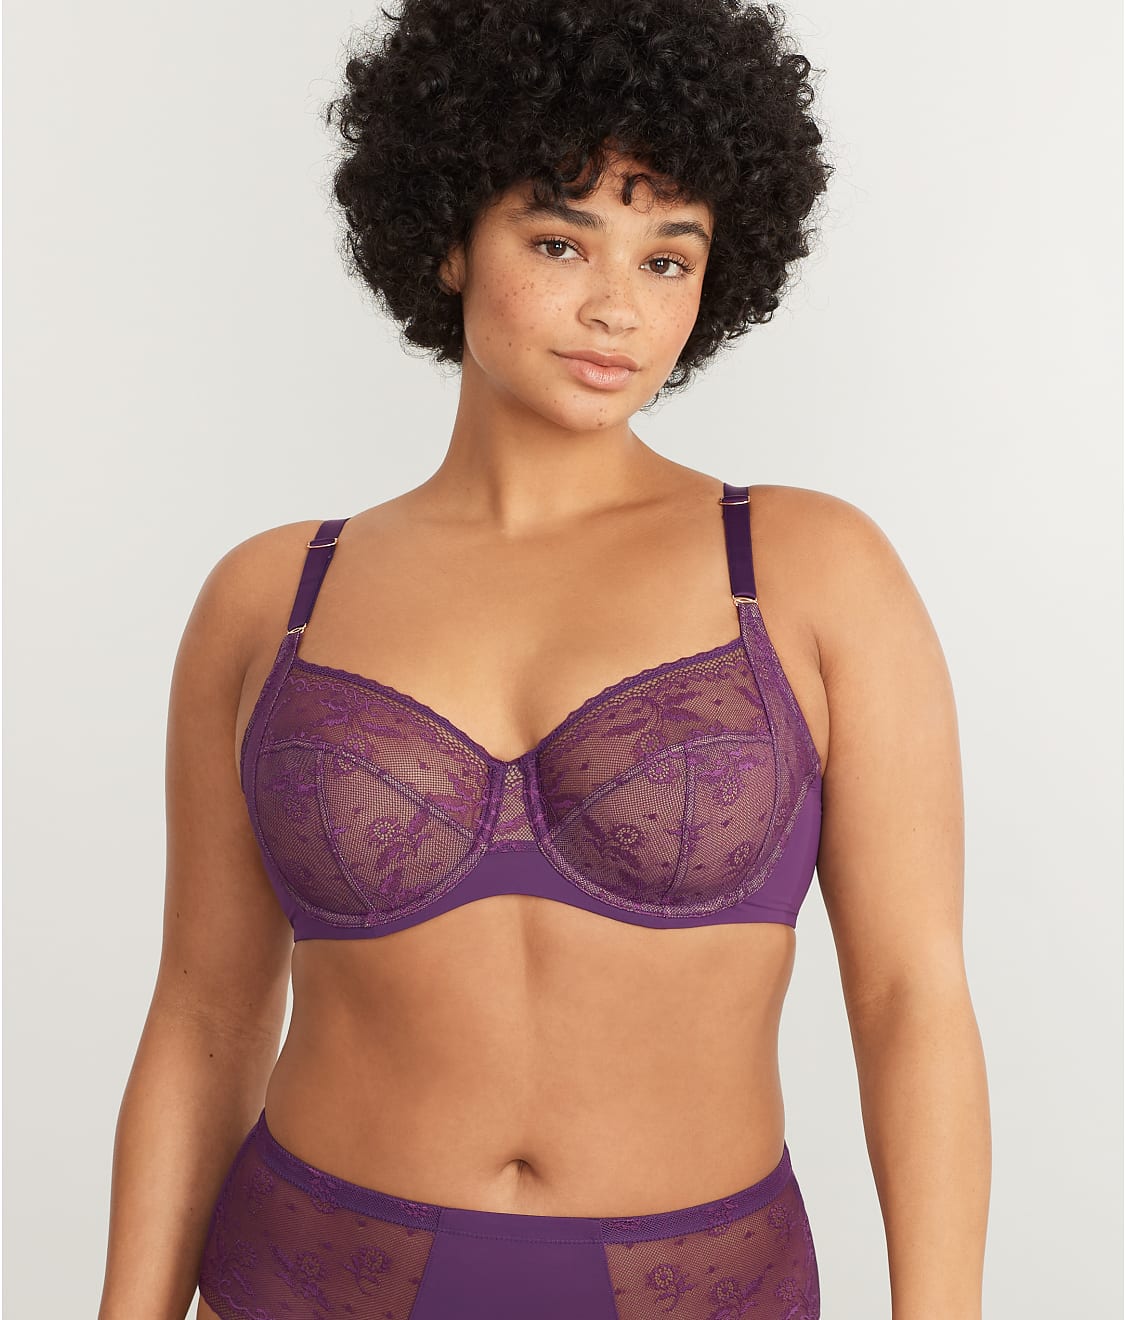 HONEYDEW INTIMATES — Show and Tell Fashion